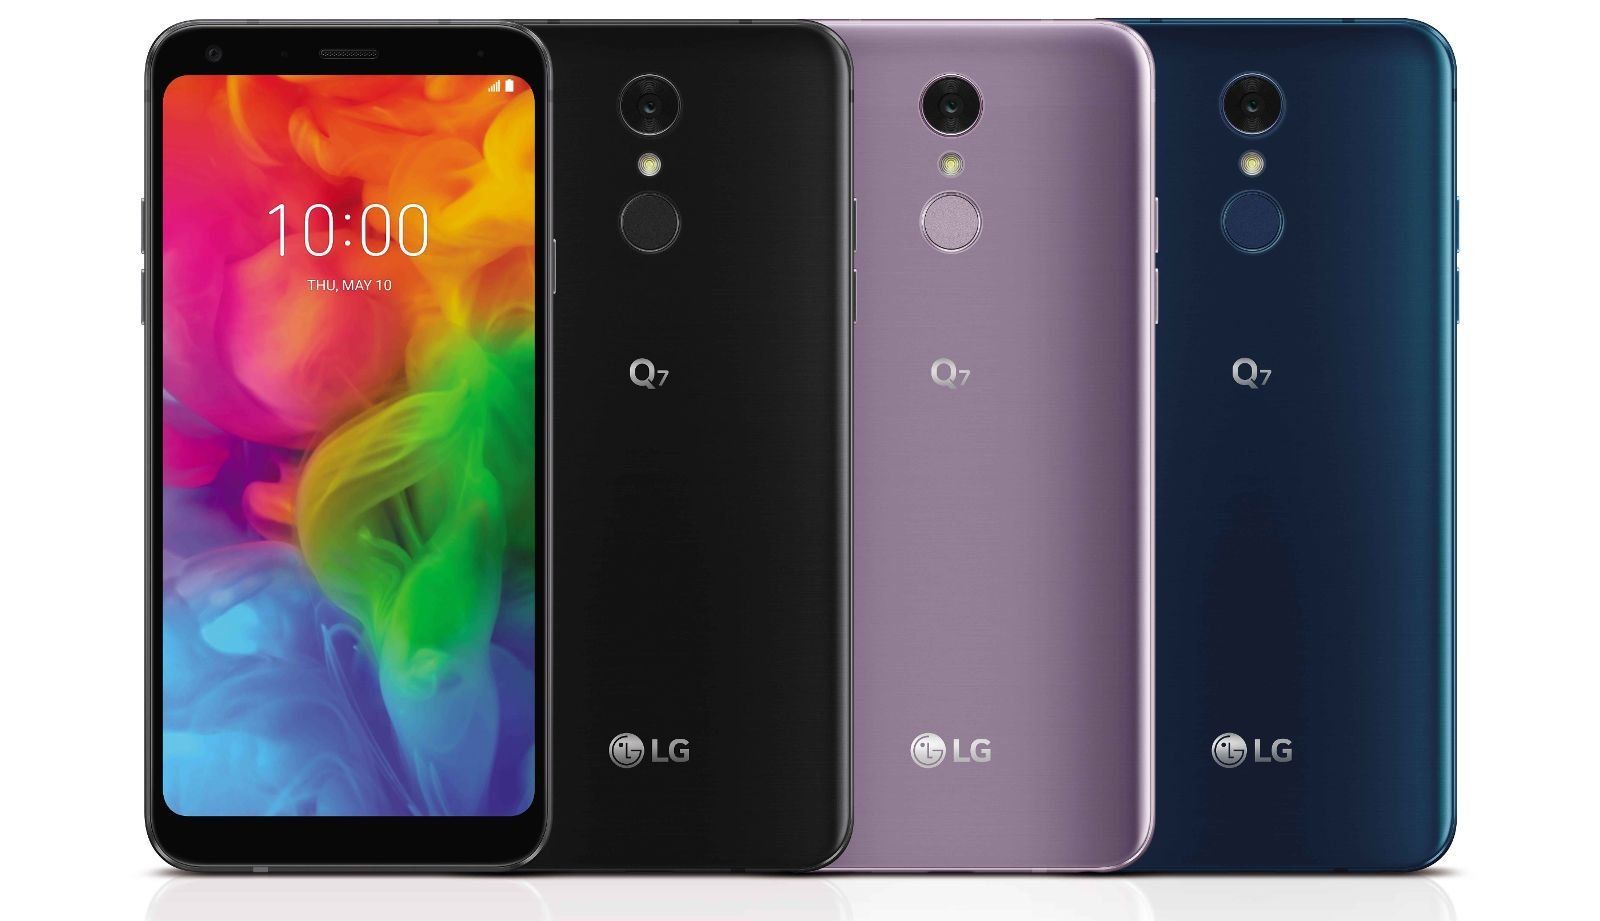 Advantages and disadvantages of LG Q7 + and Q7 smartphones - new products in 2018